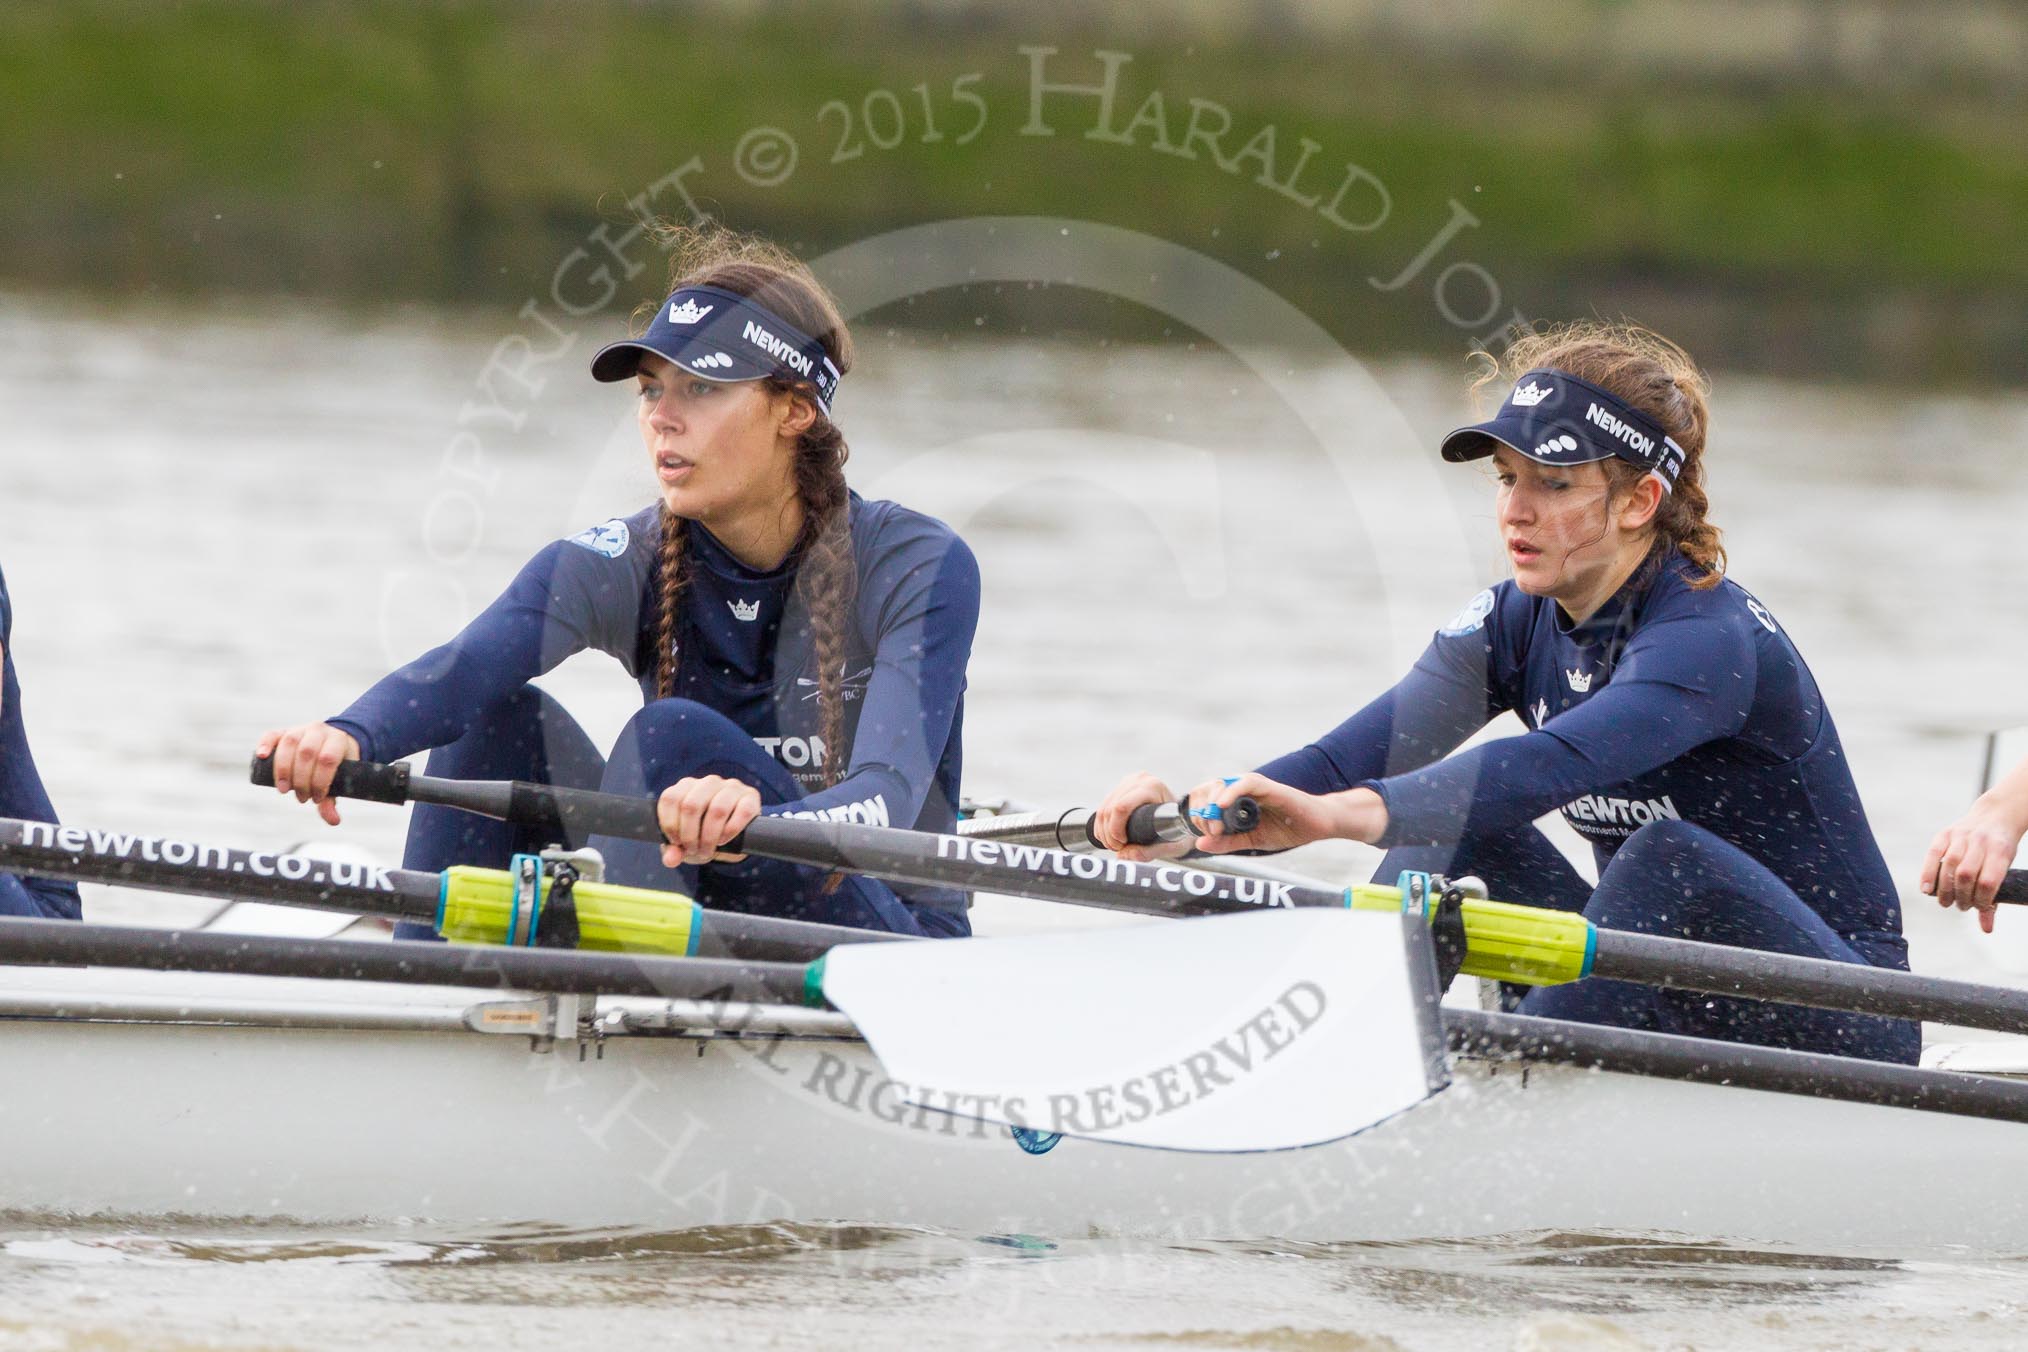 The Boat Race season 2016 - Women's Boat Race Trial Eights (OUWBC, Oxford): "Scylla", here 4-Rebecca Te Water Naude, 3-Elettra Ardissino.
River Thames between Putney Bridge and Mortlake,
London SW15,

United Kingdom,
on 10 December 2015 at 12:18, image #143